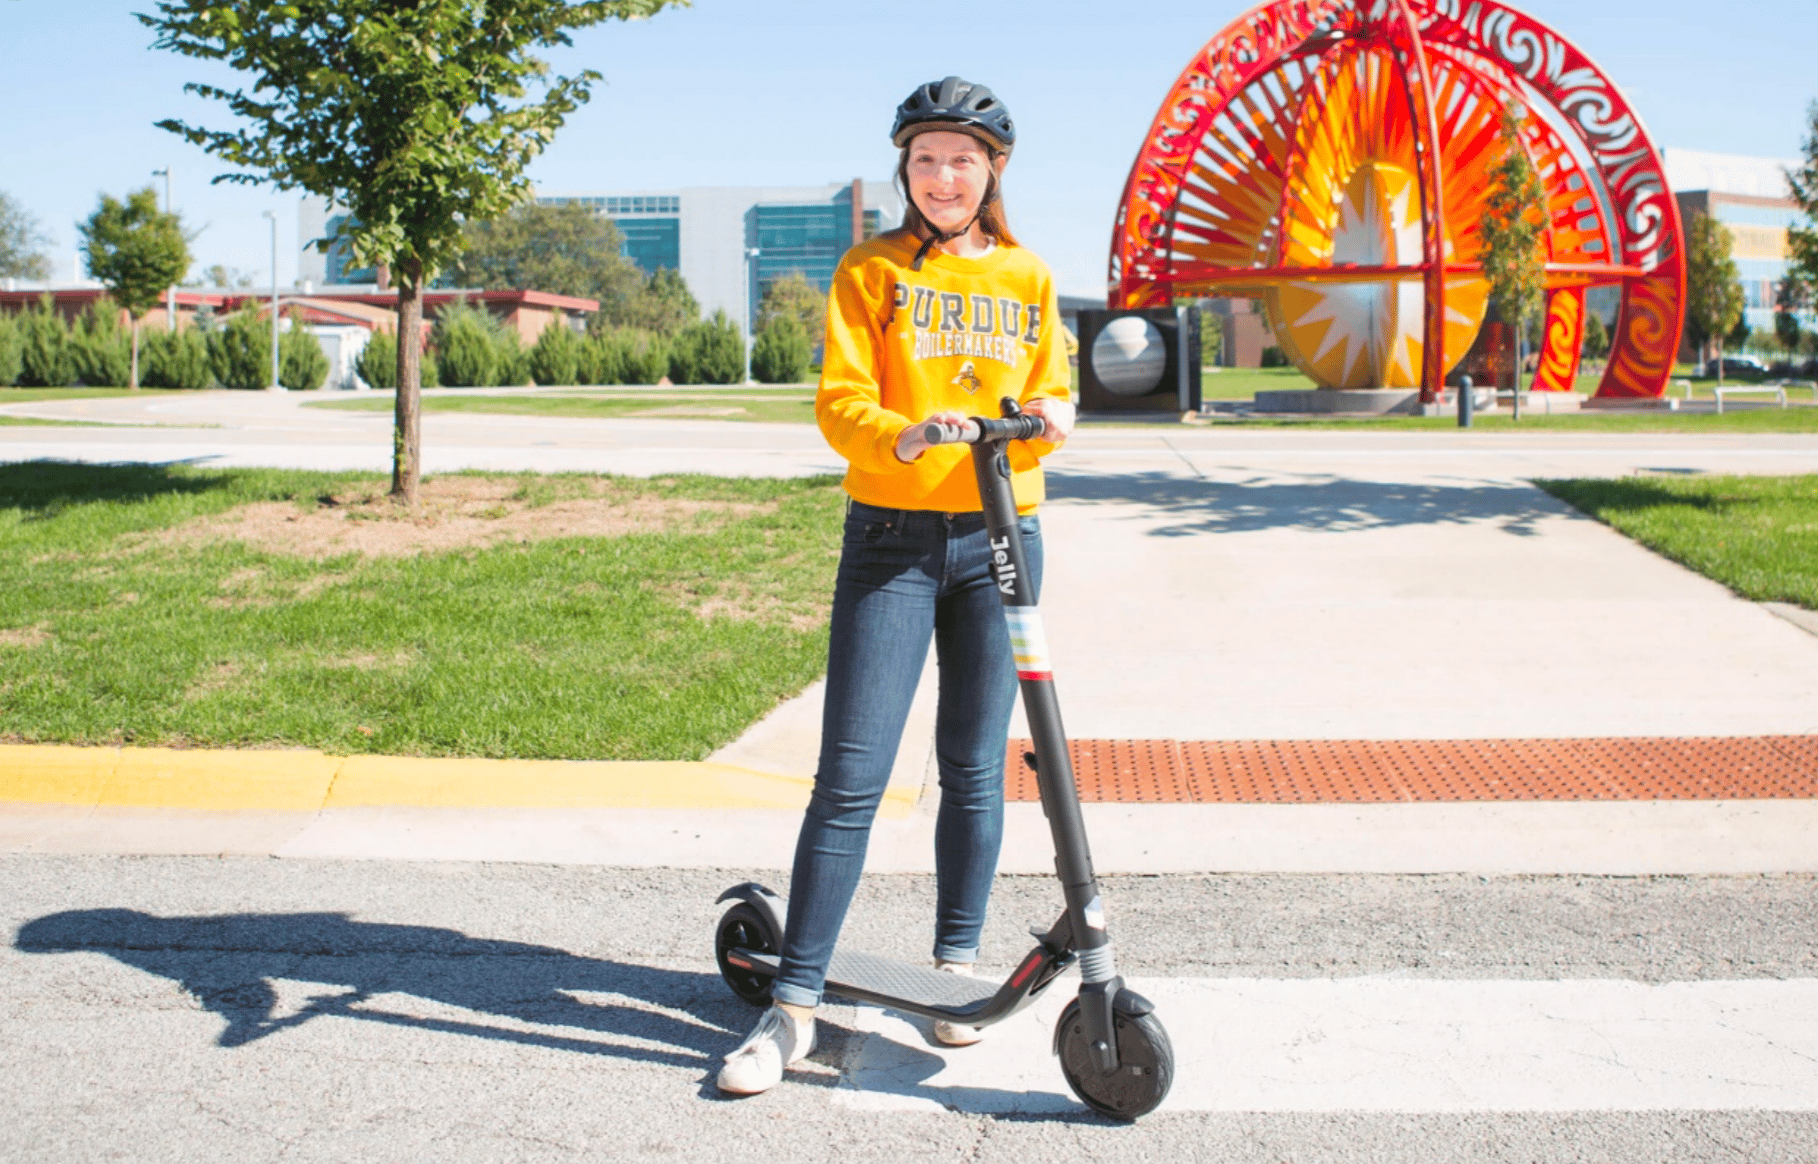 Electric Scooters as Alternative Transportation in Urban Areas